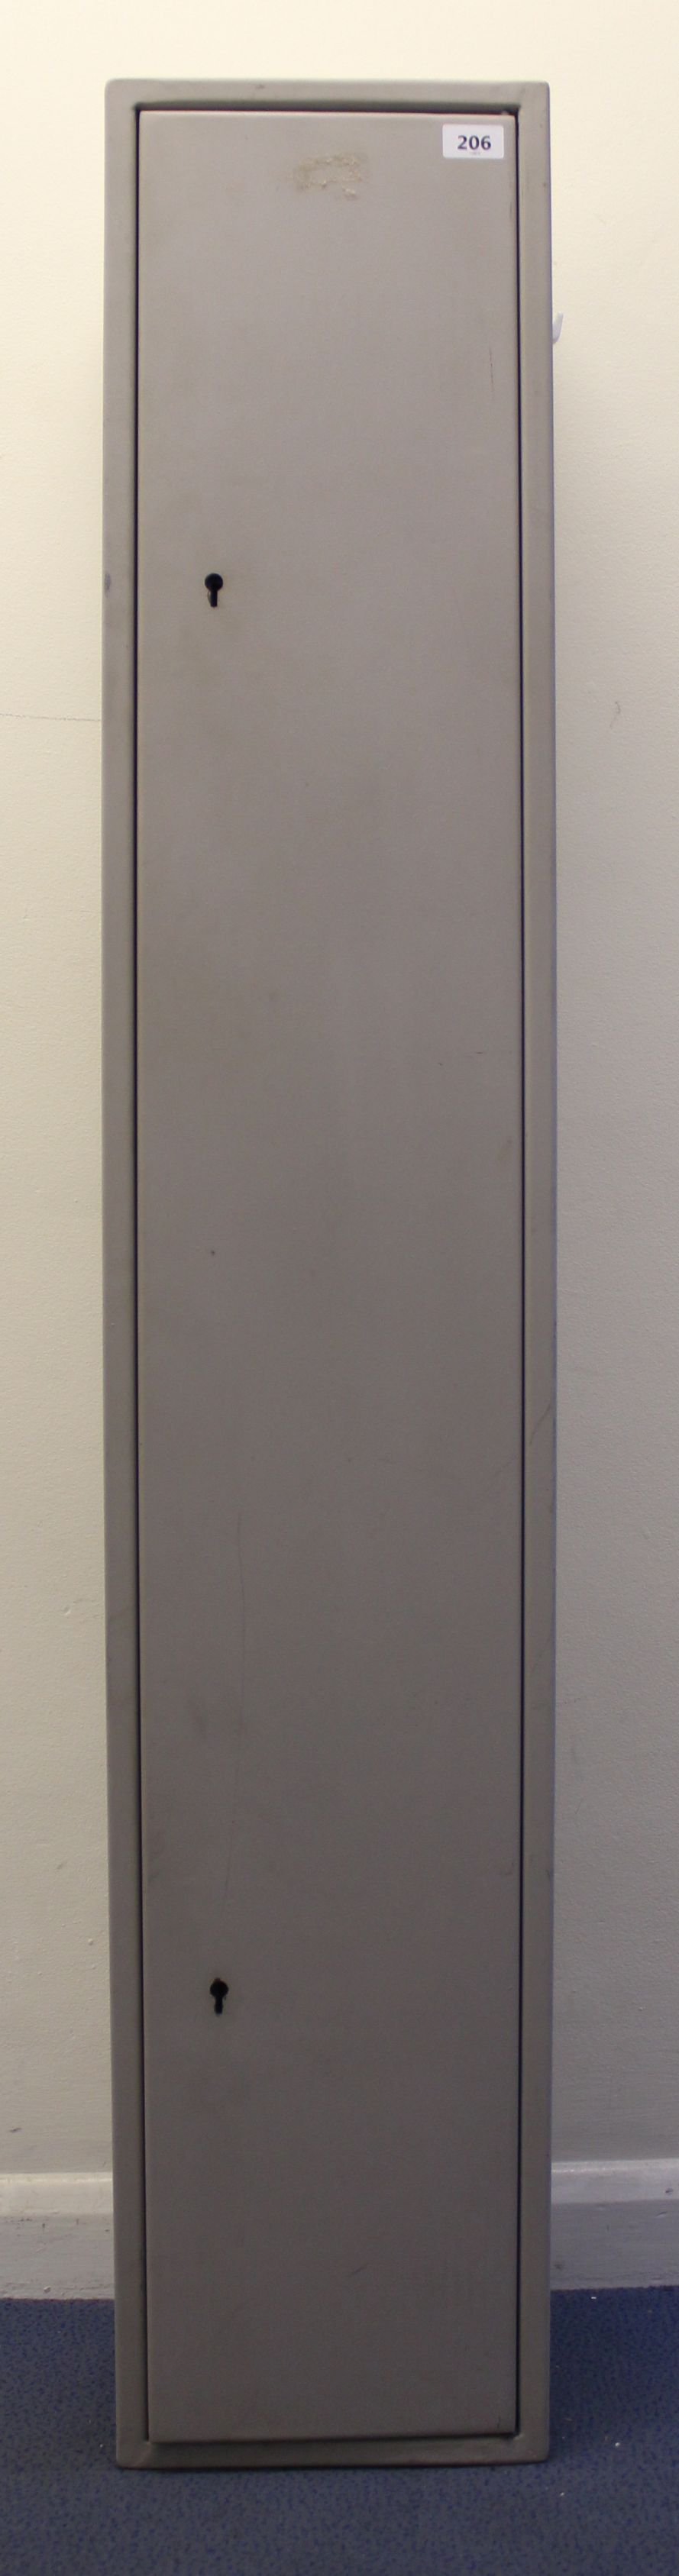 Steel five gun security cabinet with locking top box, 1500 x 280 x 250mm